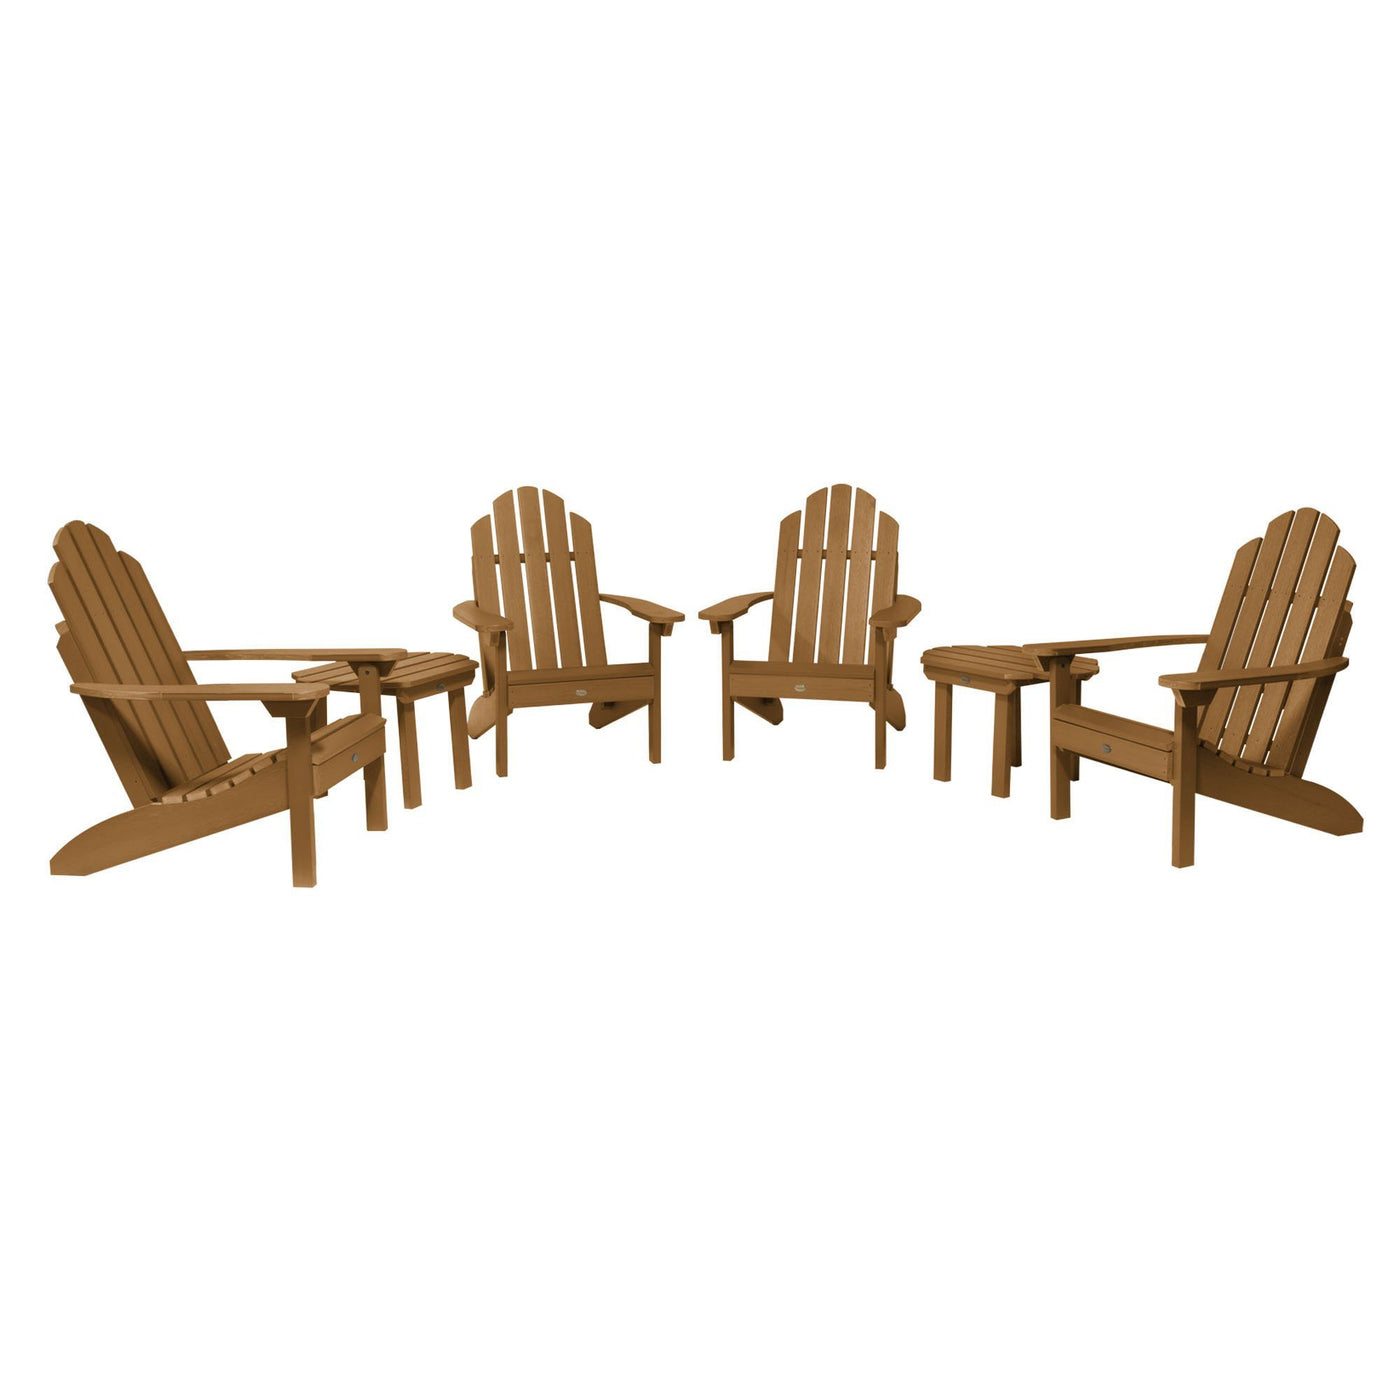 4 Classic Westport Adirondack Chairs with 2 Side Tables Highwood USA Toffee 